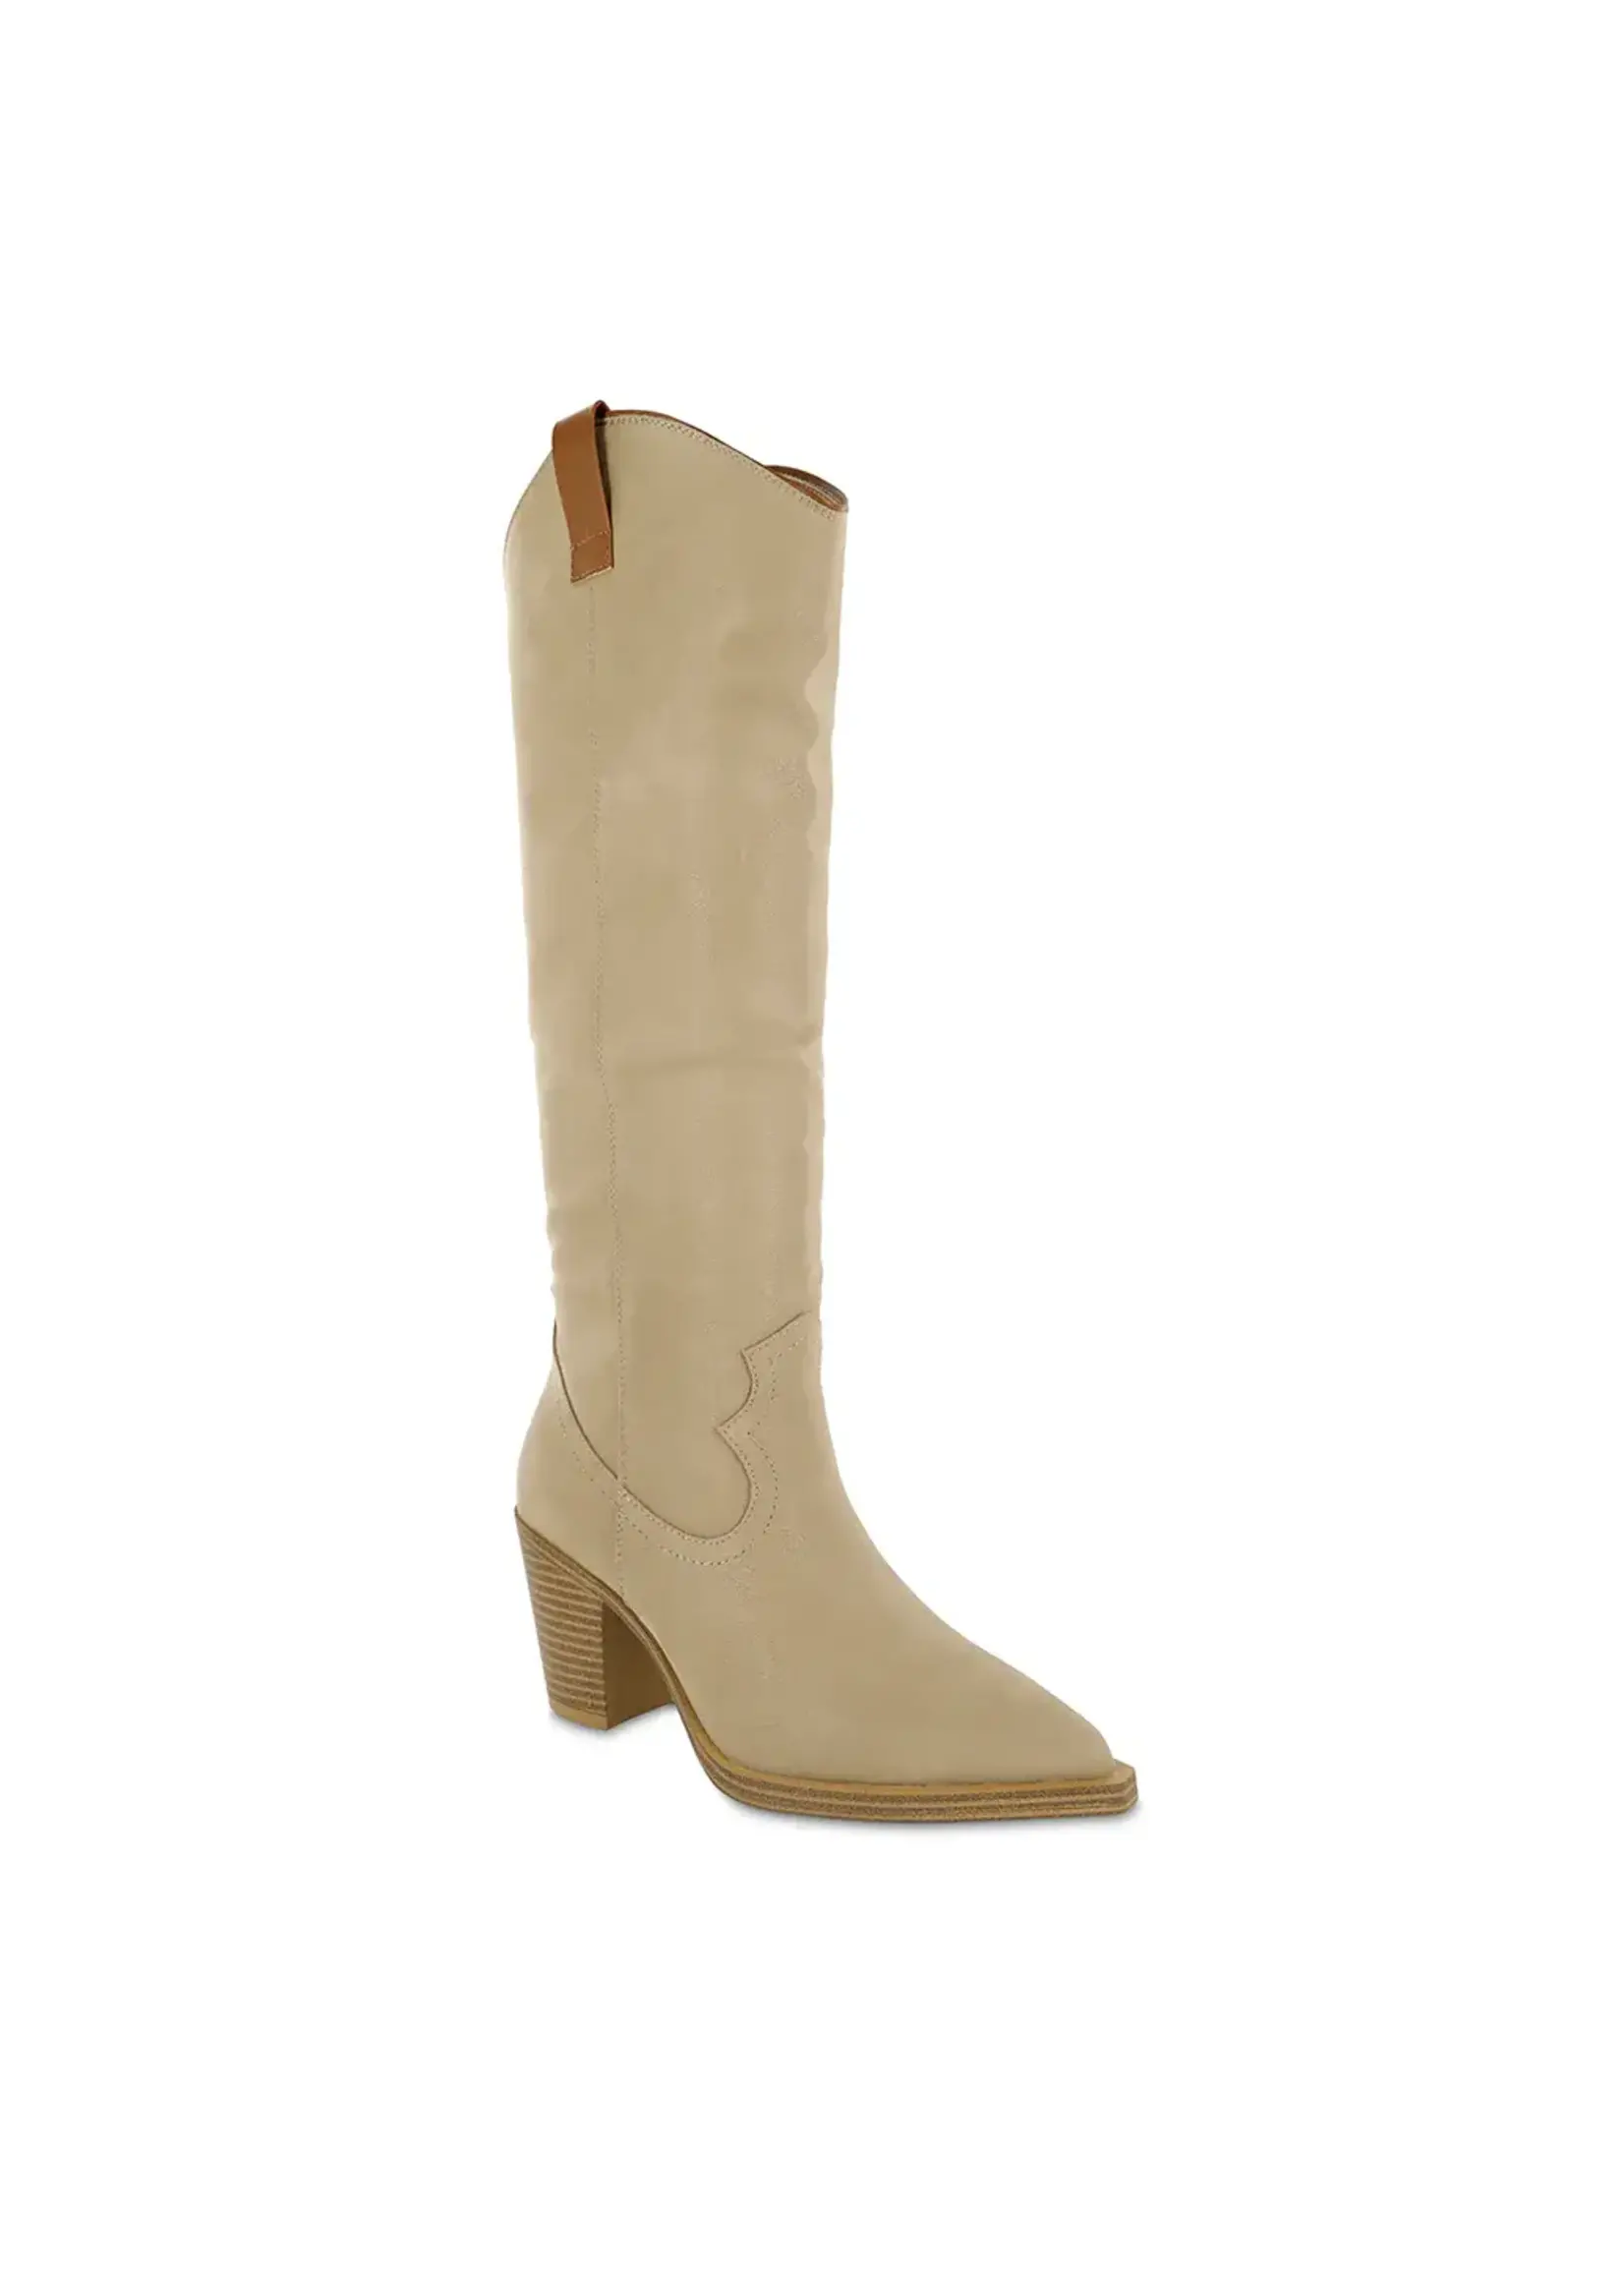 Mia Shoes Archer Western Knee High Boot in Stone by MIA